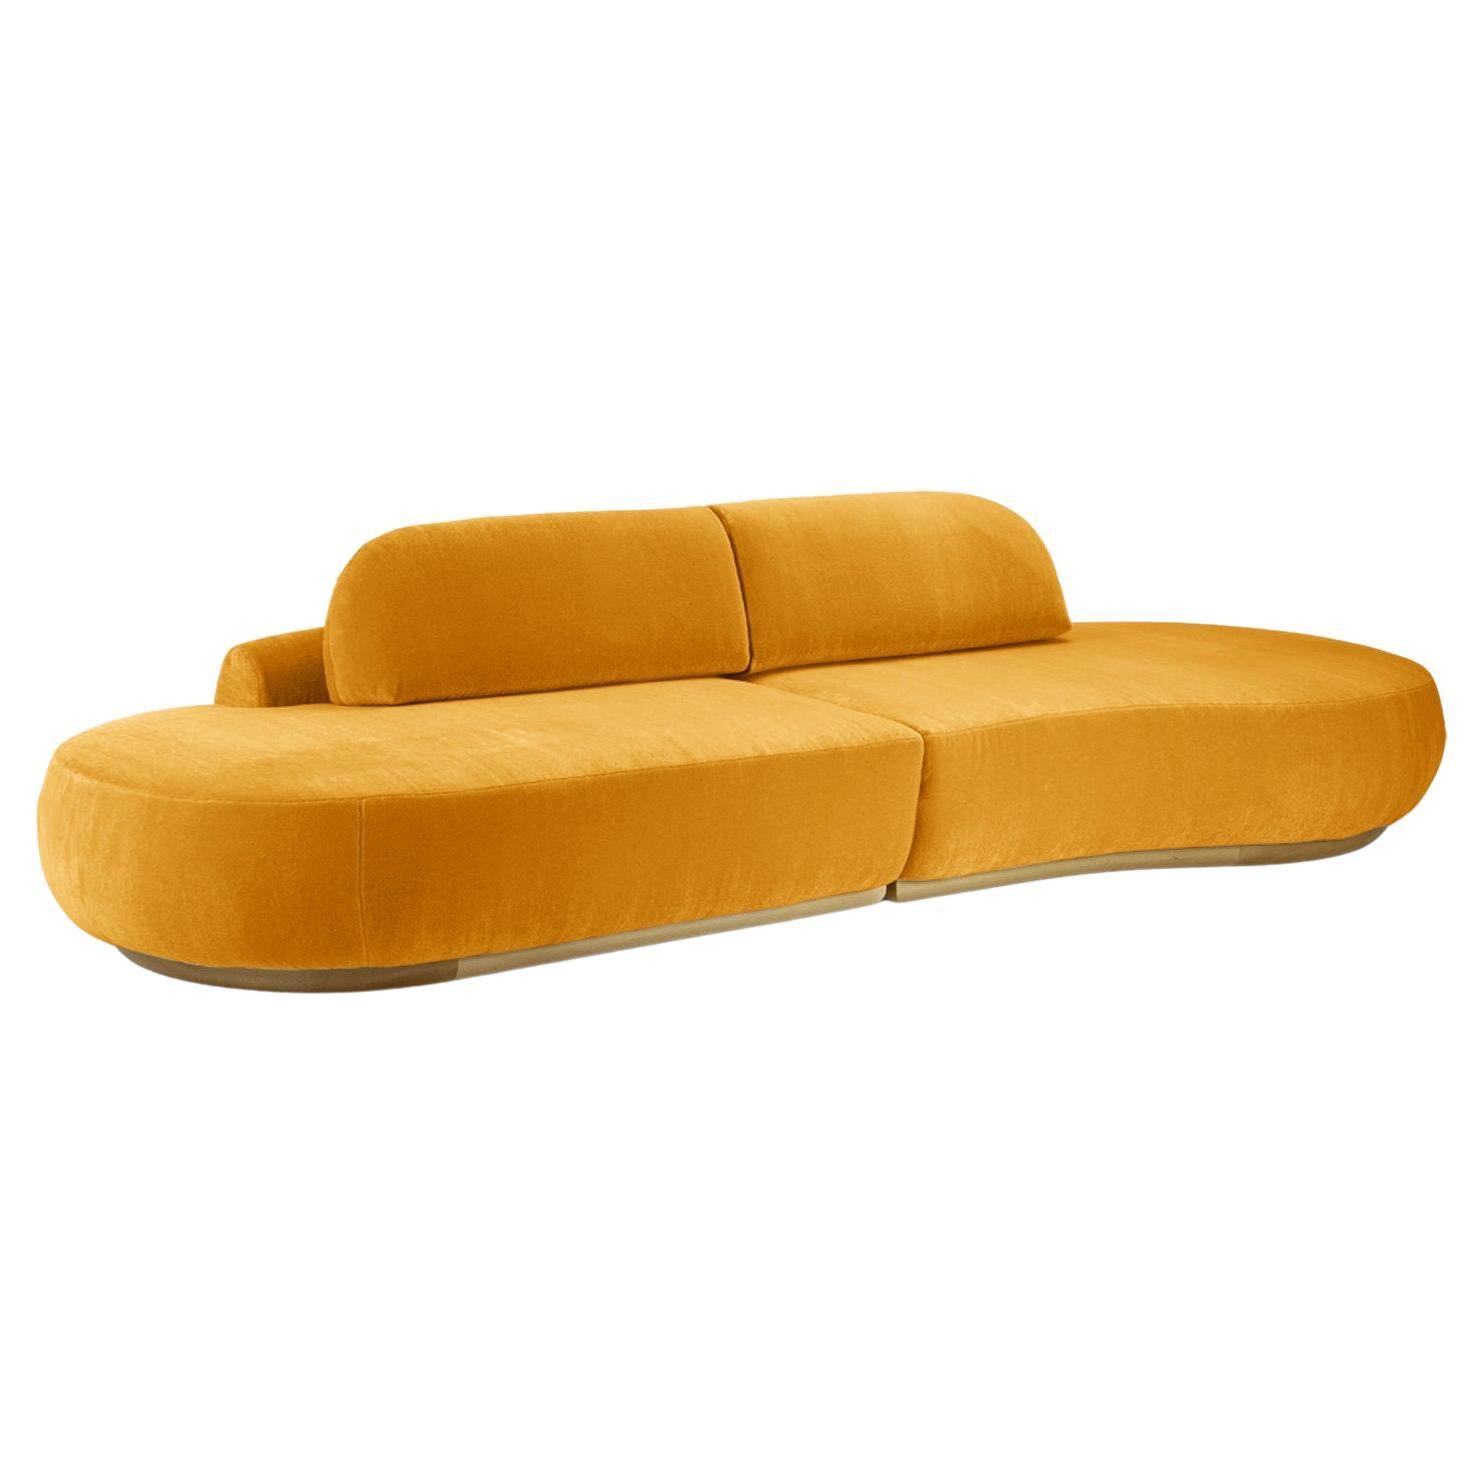 Naked Curved Sectional Sofa, 2 Piece with Natural Oak and Corn For Sale